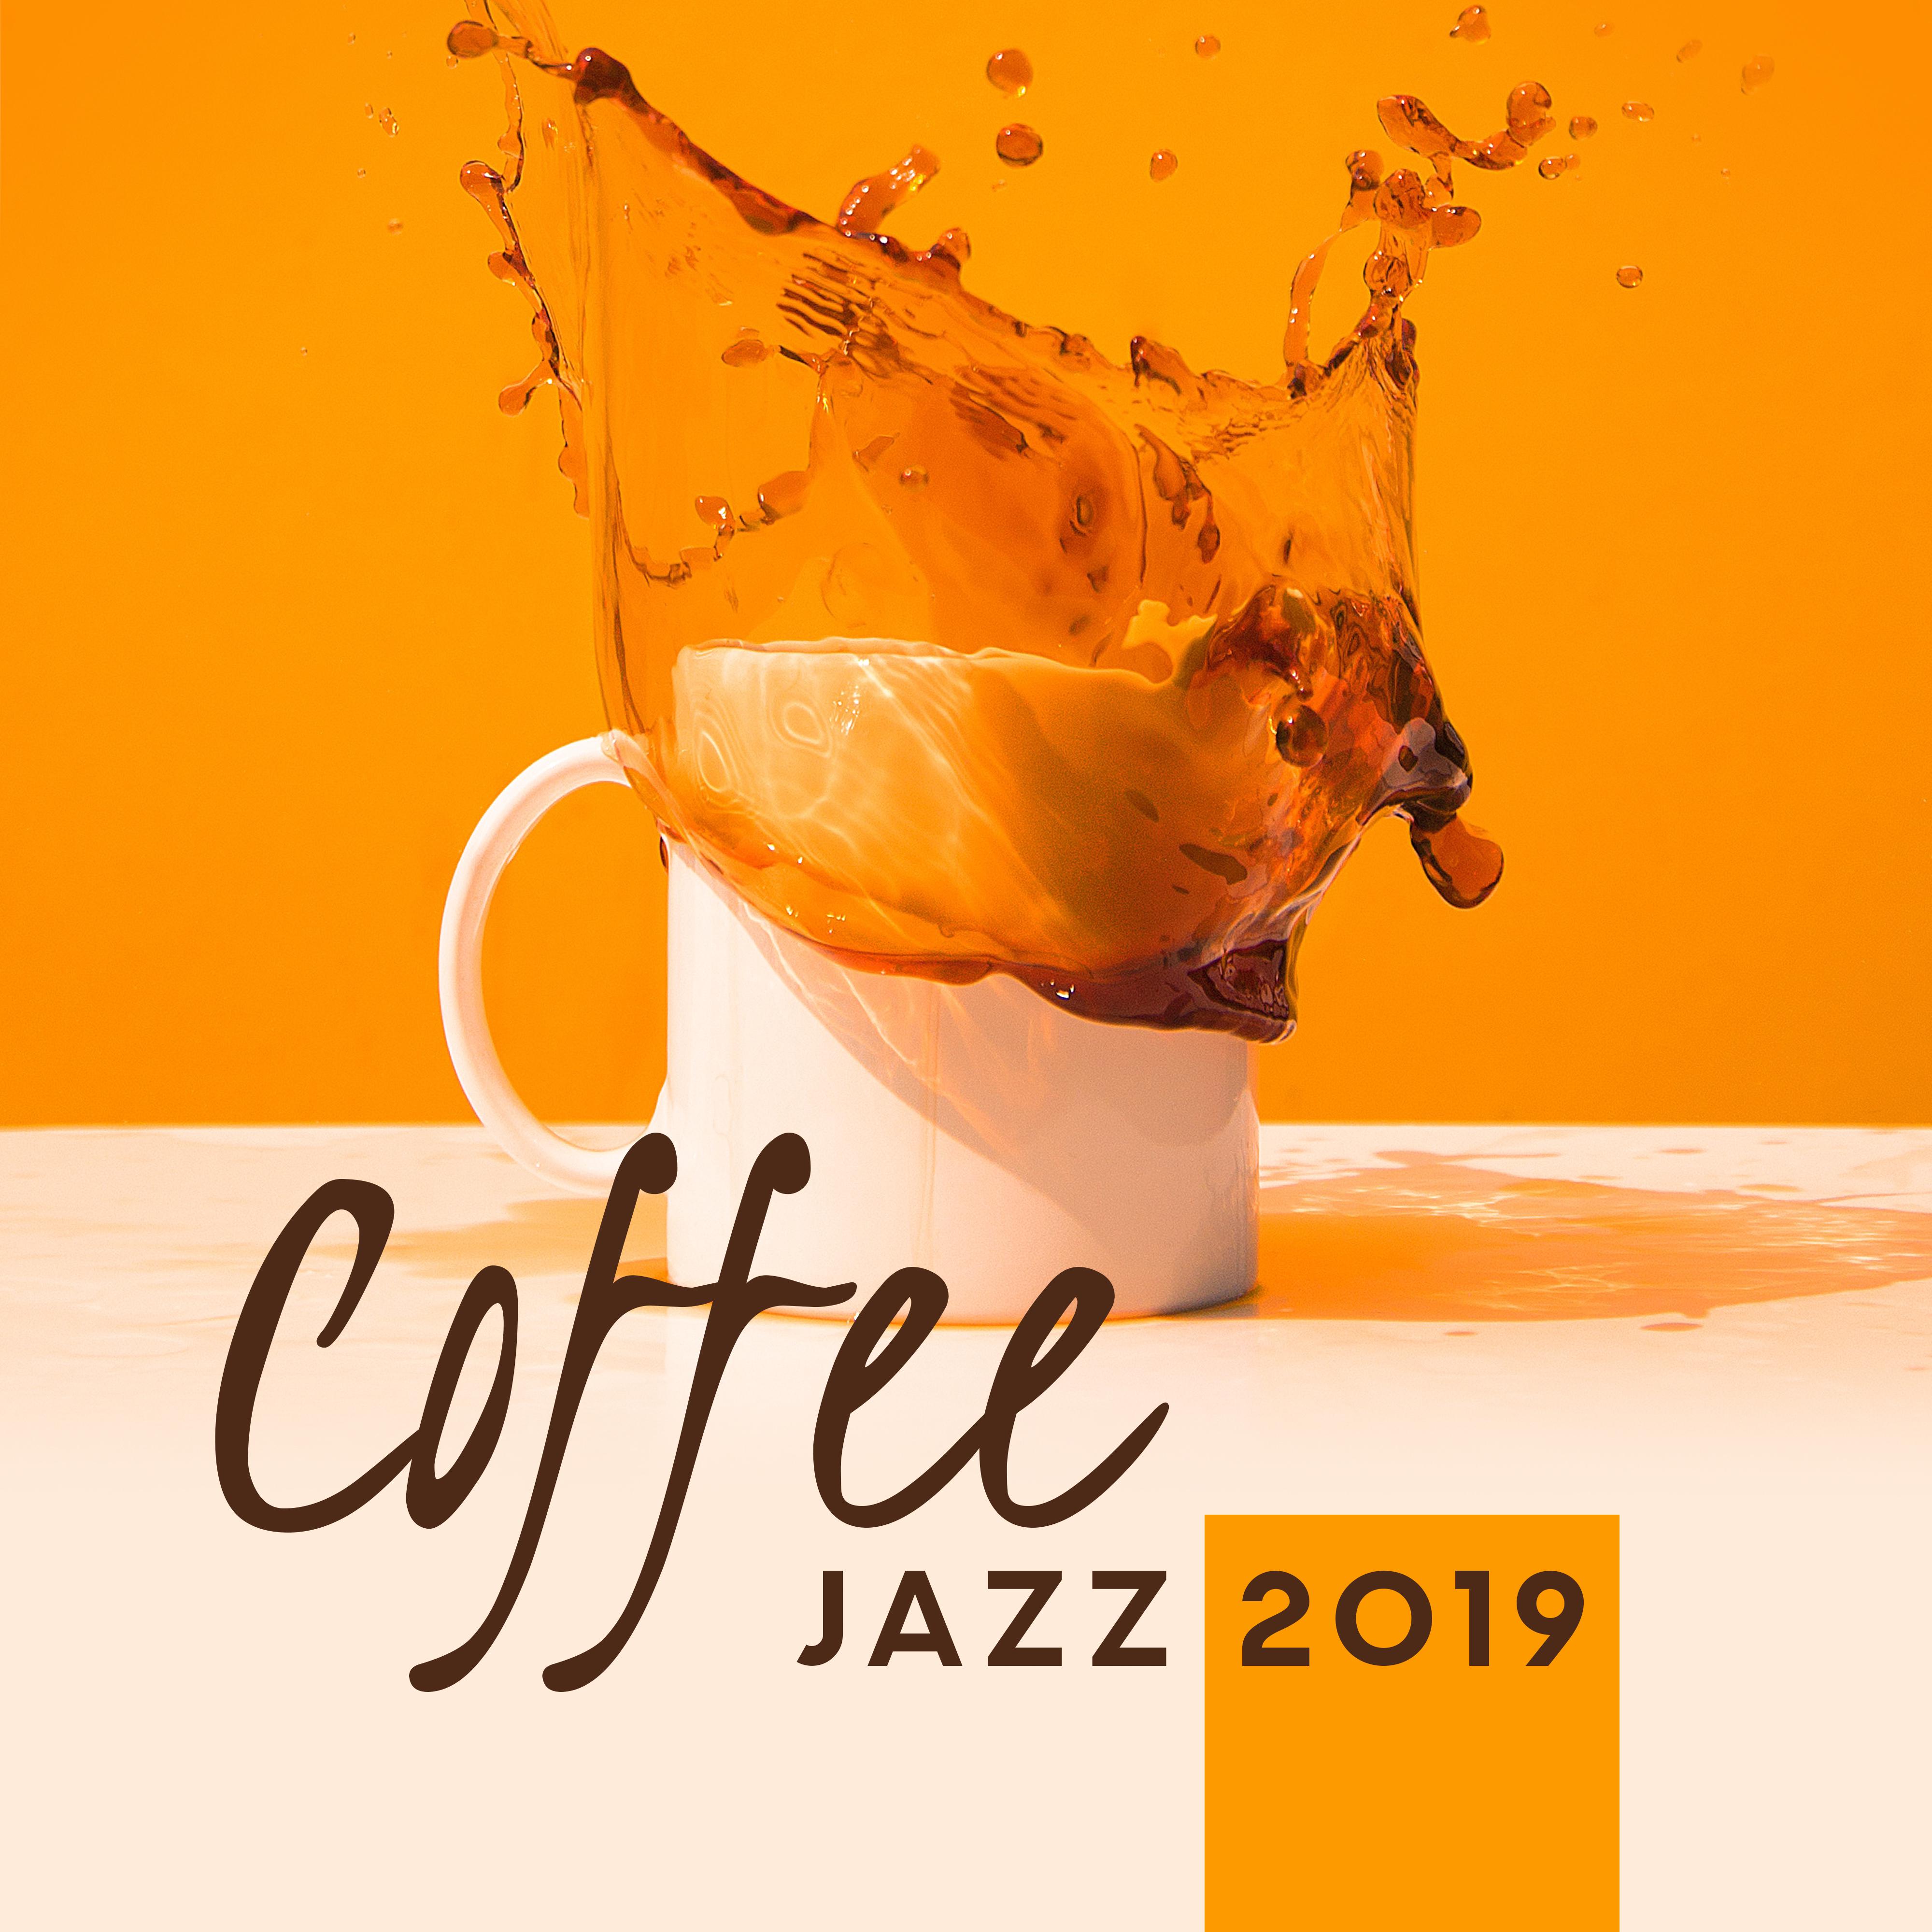 Coffee Jazz 2019  Best Smooth Jazz Music Selection for Spending Time in Cafe, Relaxing Sounds of Piano, Sax, Trumpet  Others